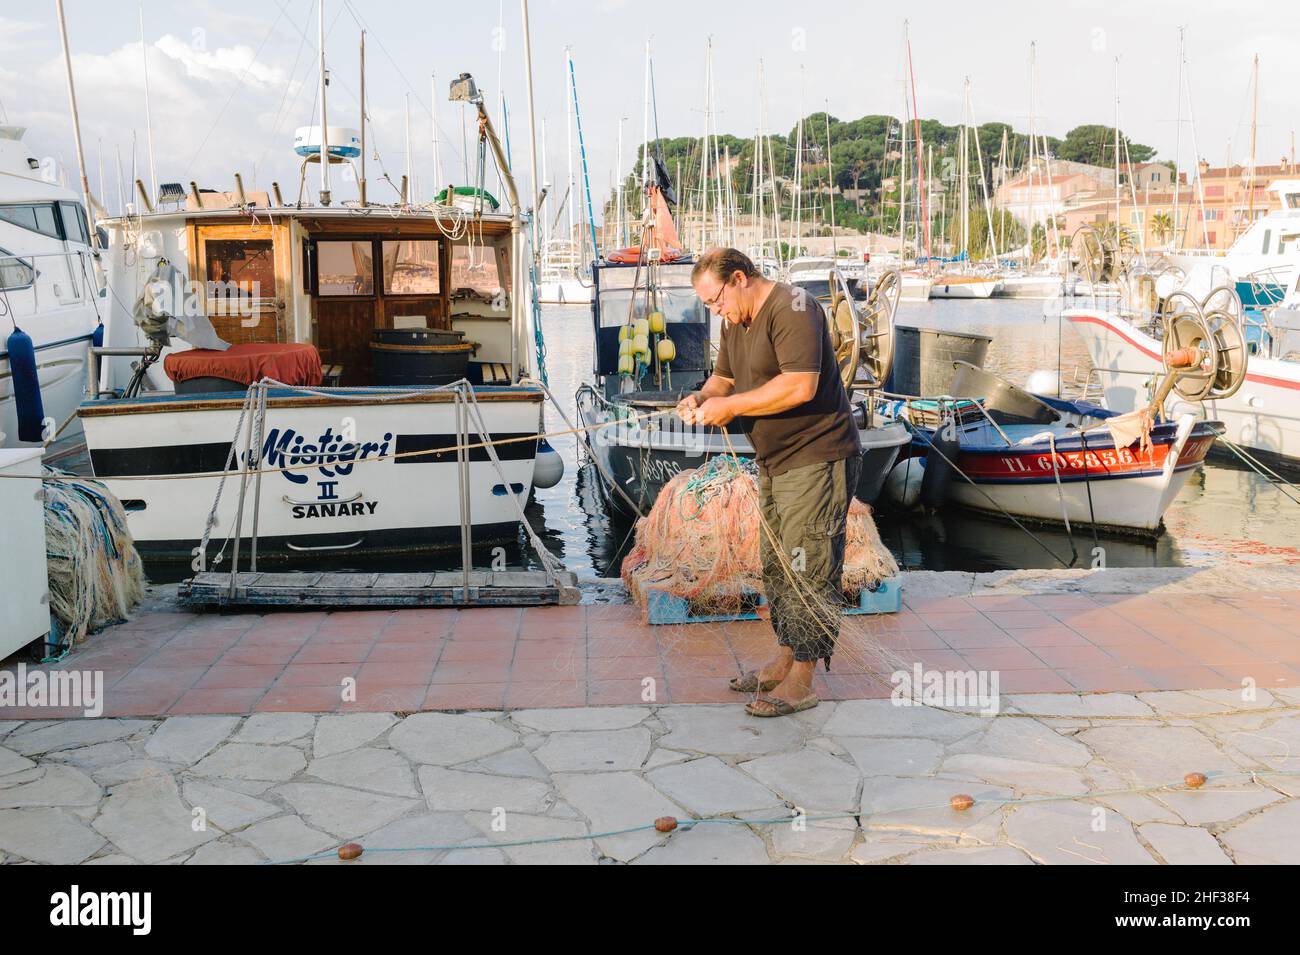 Fisherman mending his nets while smoking a cigarette after a fishing trip at first light in the small French fishing port of Sanary sur Mer, Cote d' Azur in the south of France. 2014. Stock Photo